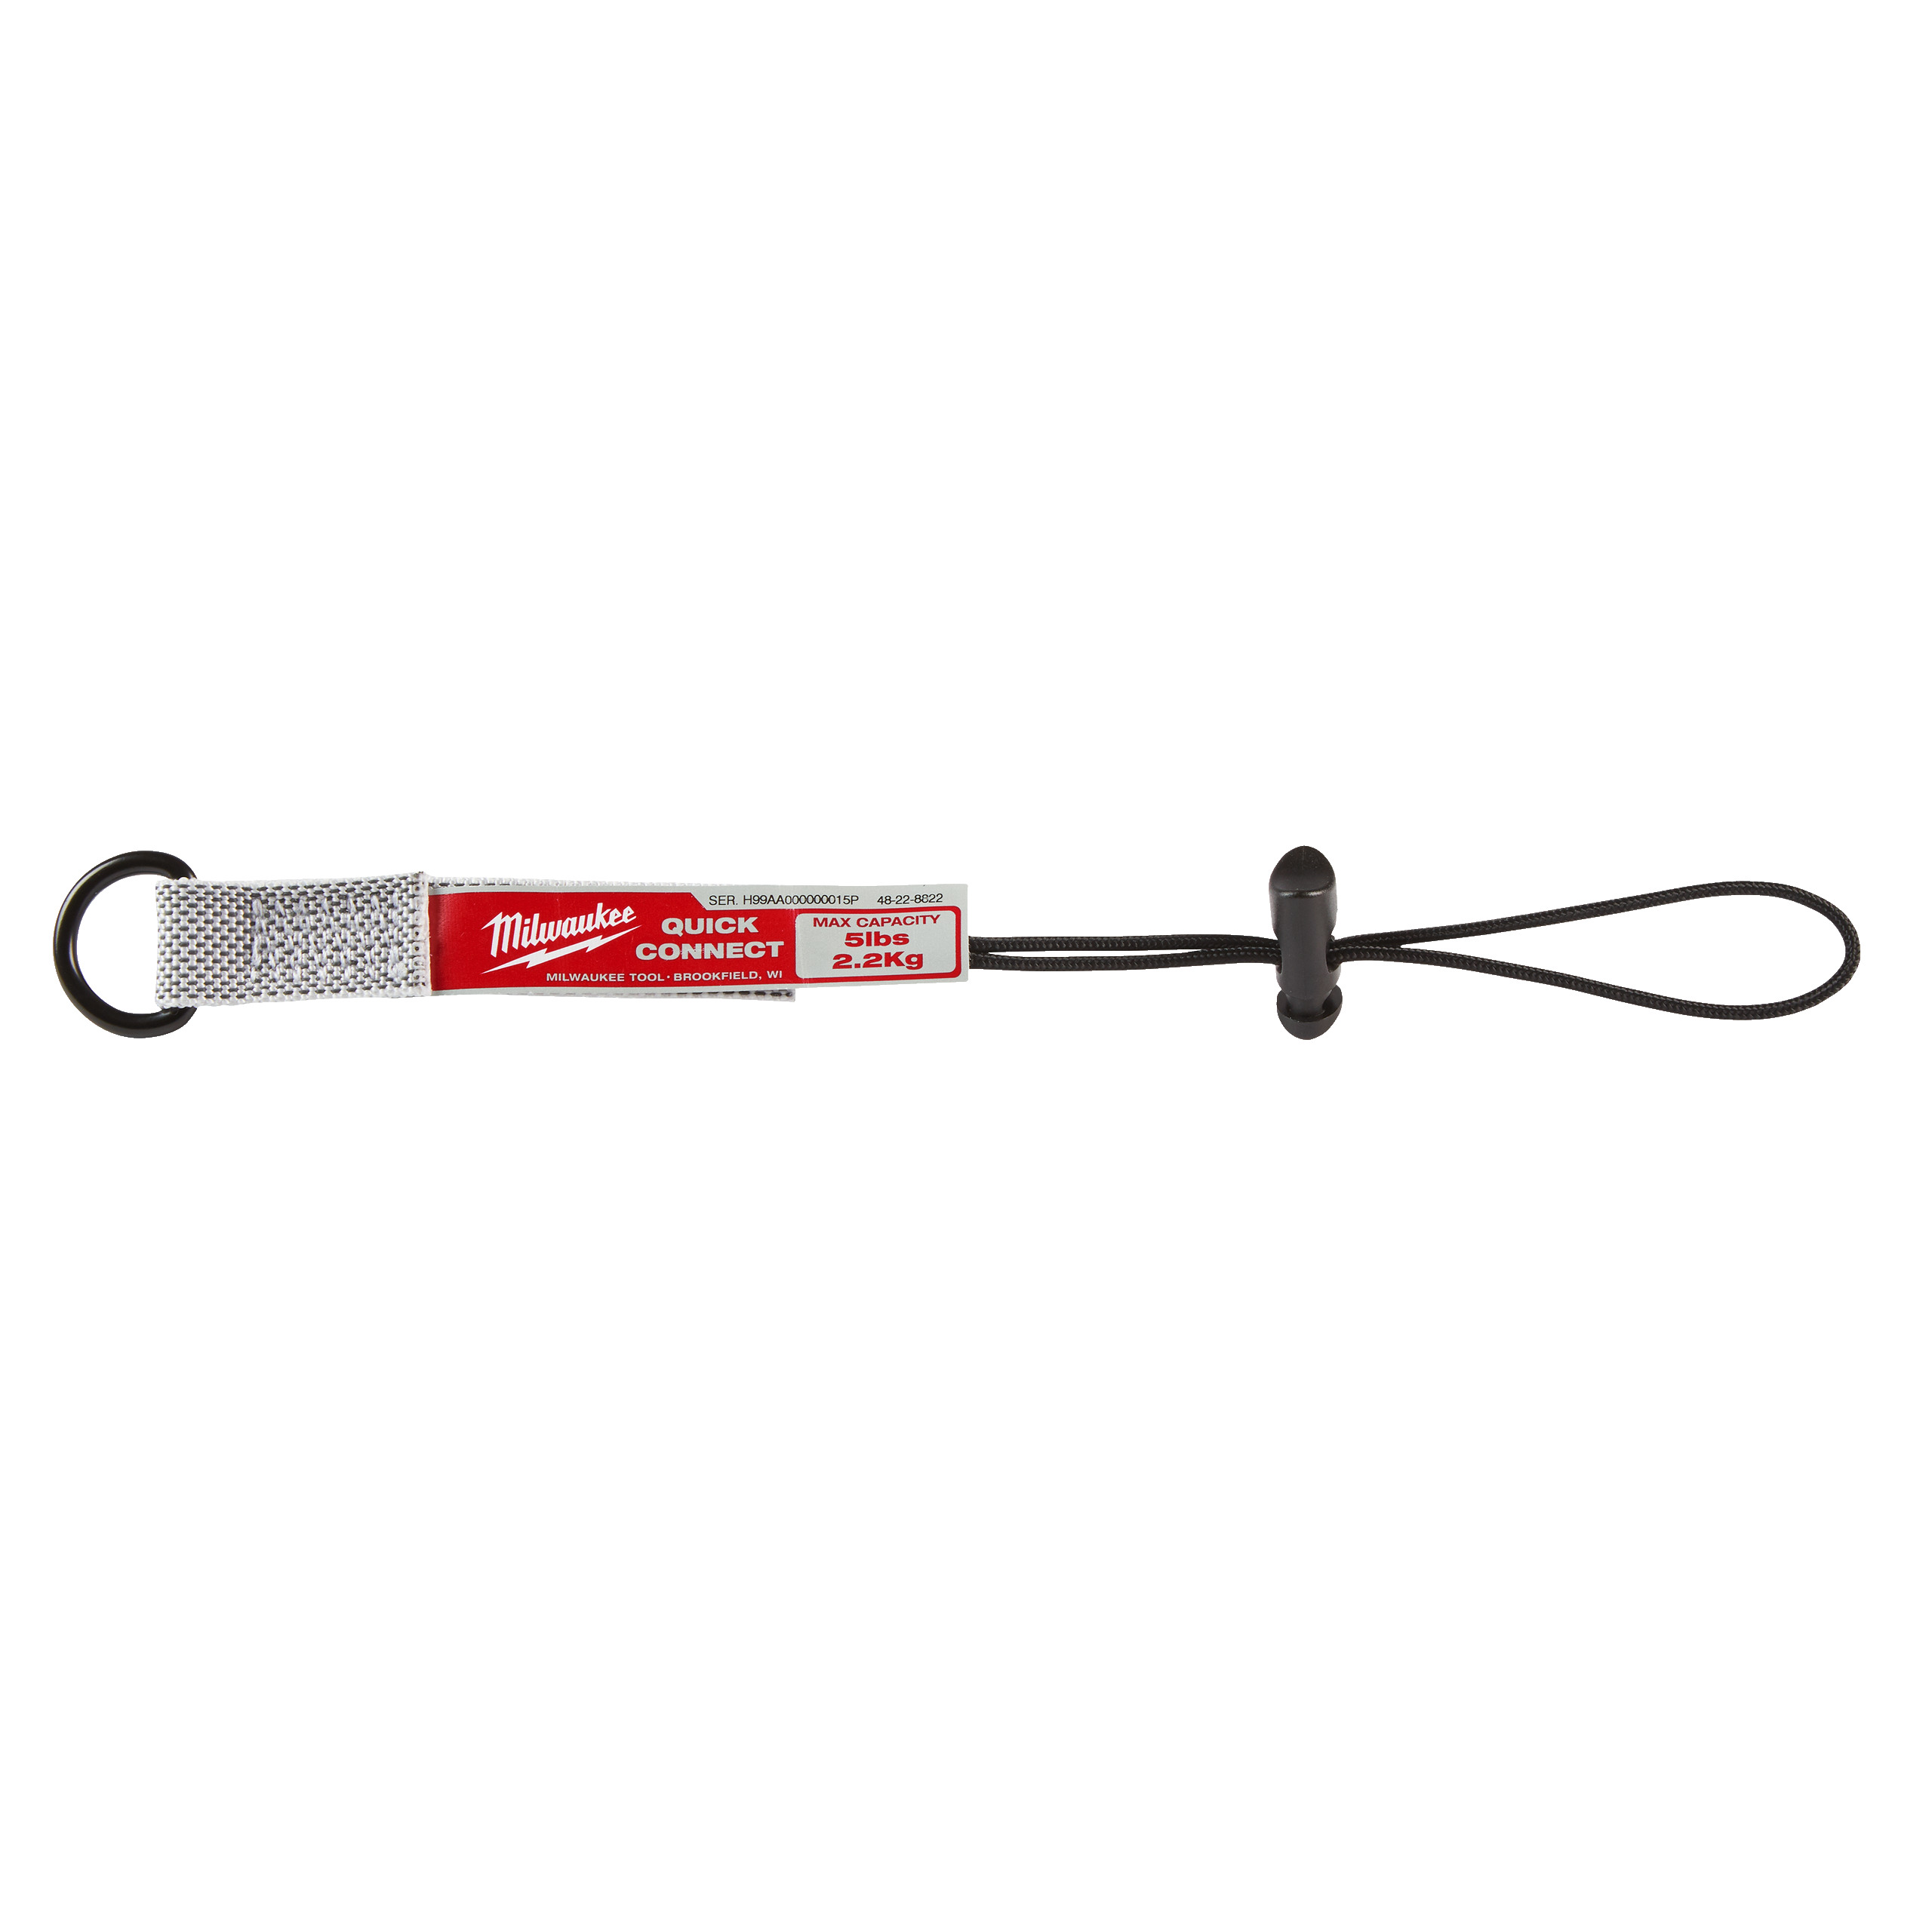 Milwaukee 3pc 2.25kg Small Quick-Connect Accessory 4932471430